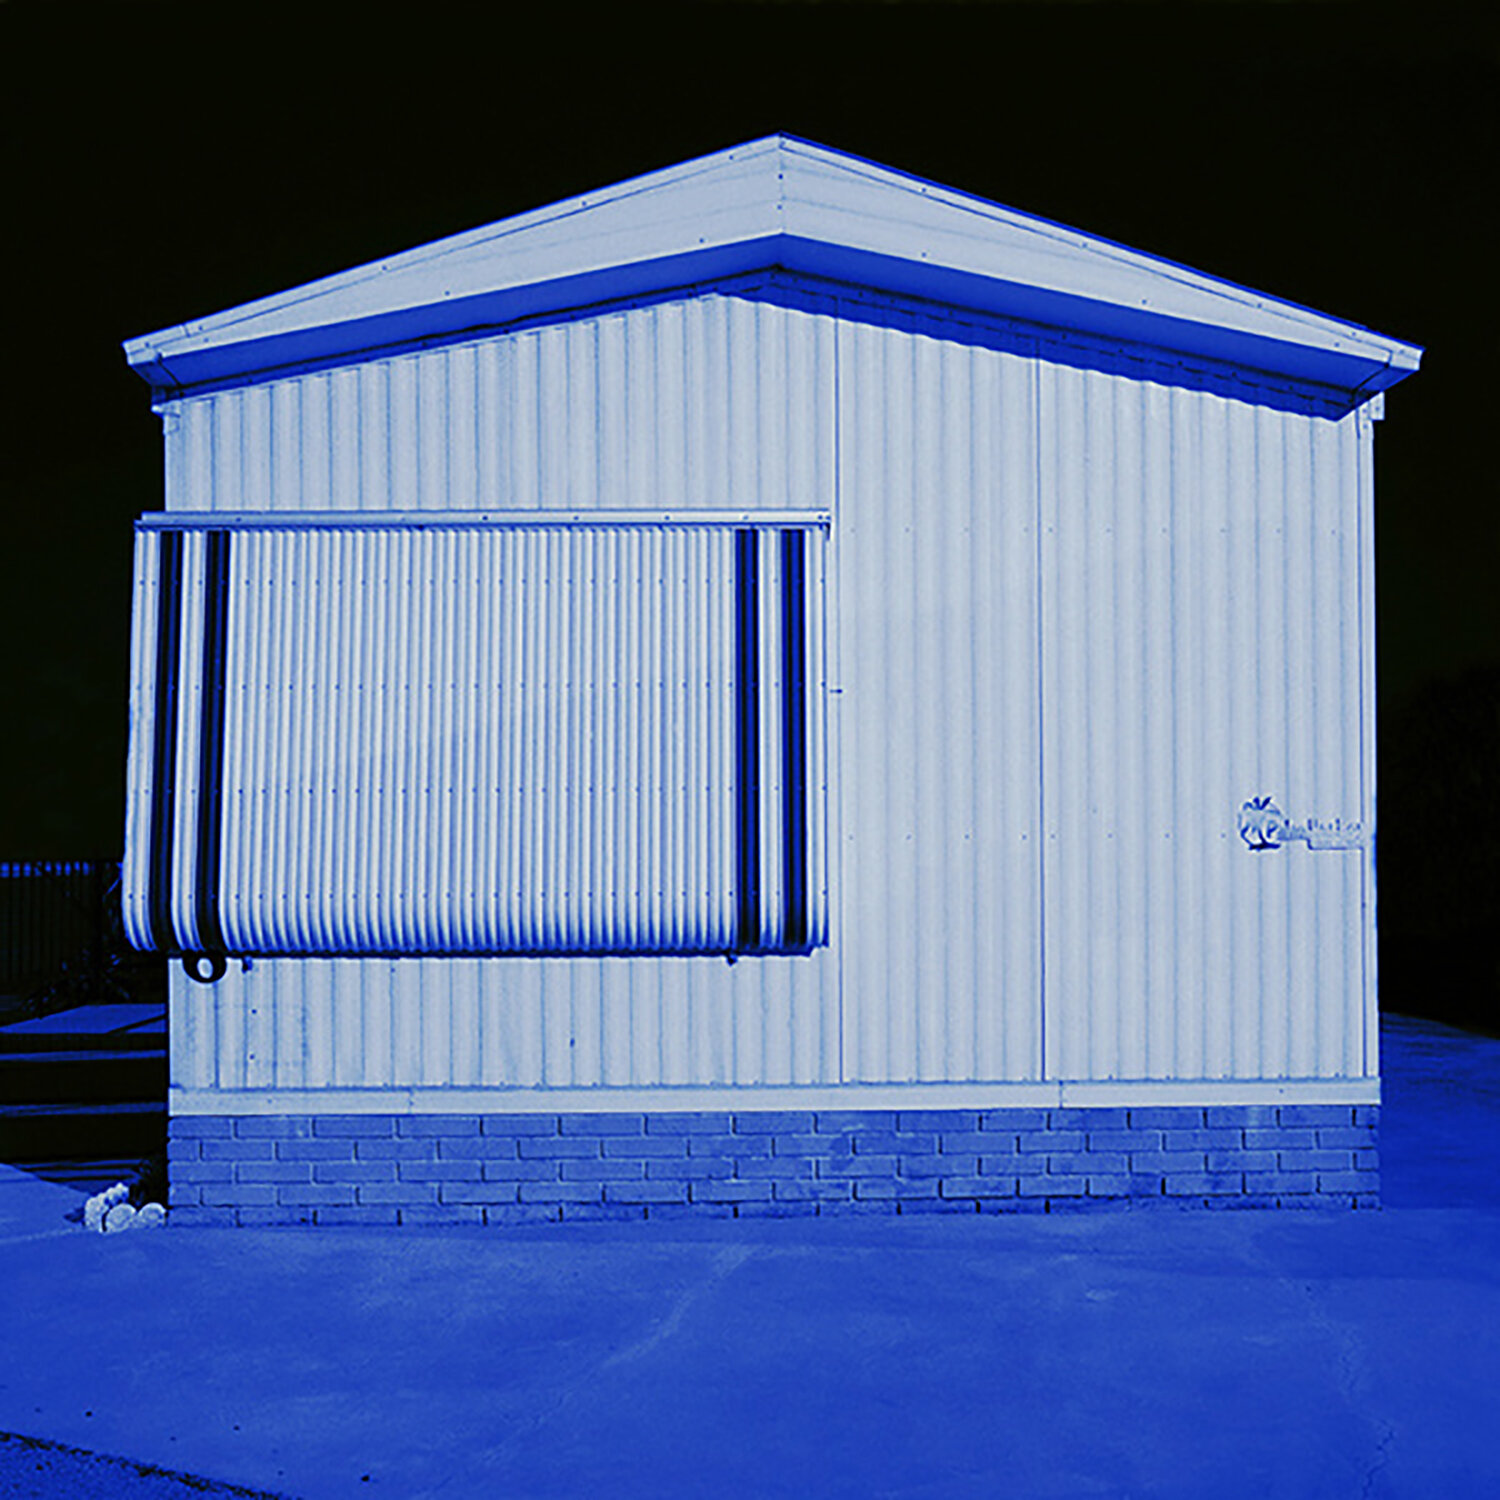 JUDY GELLES | Mobile Home #16, 15 x 15 inches / 38 x 38 cm, Fuji crystal archive print, edition of 10, 2001-2006